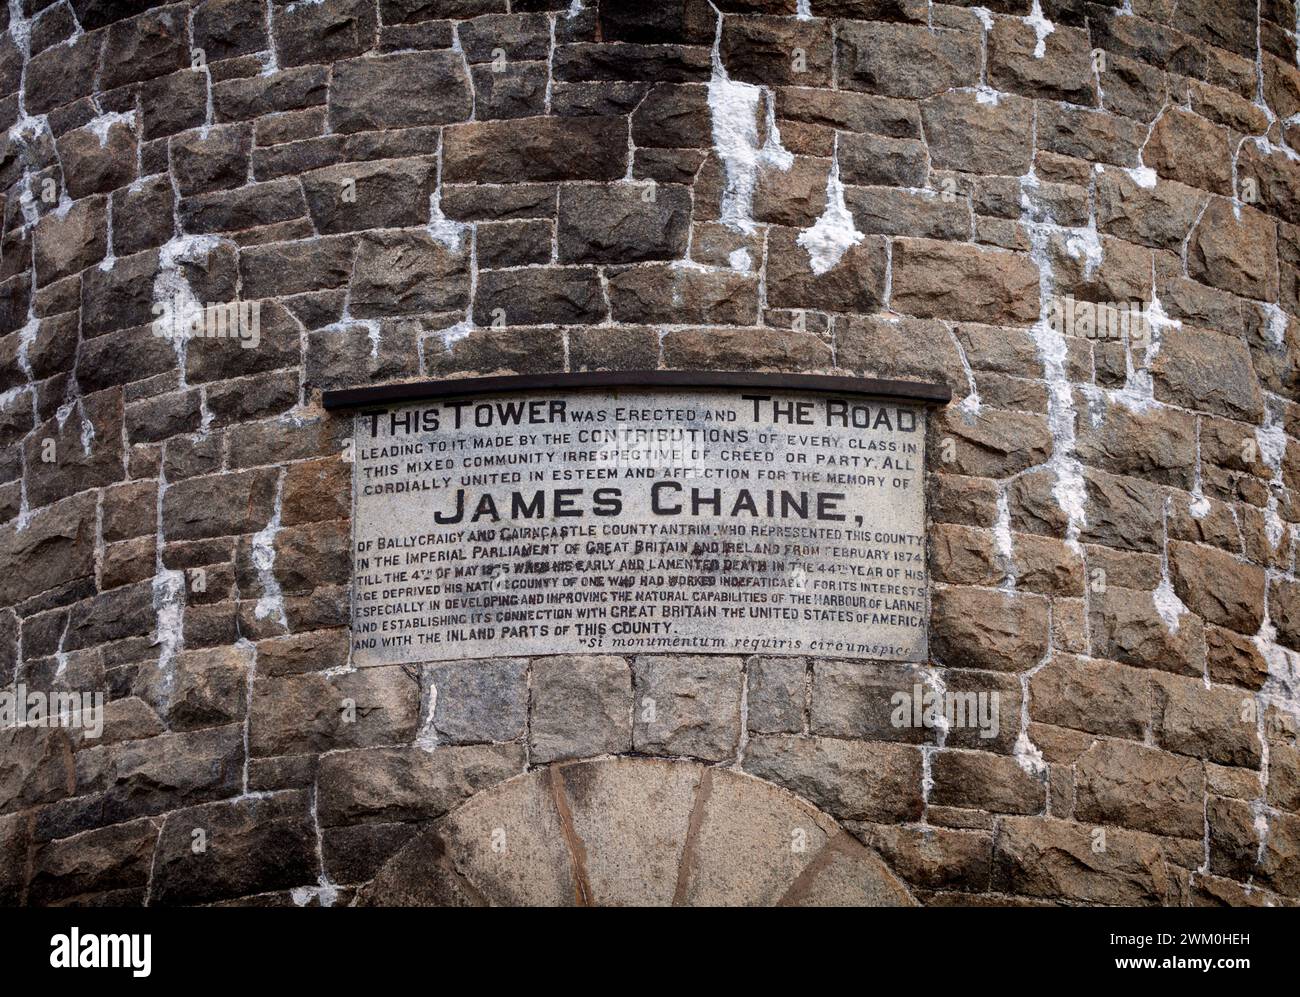 A dedication plaque on the Chaine memorial a mock round tower at the entrance to Larne Lough in County Antrim, Northern Ireland built  in 1888. Stock Photo